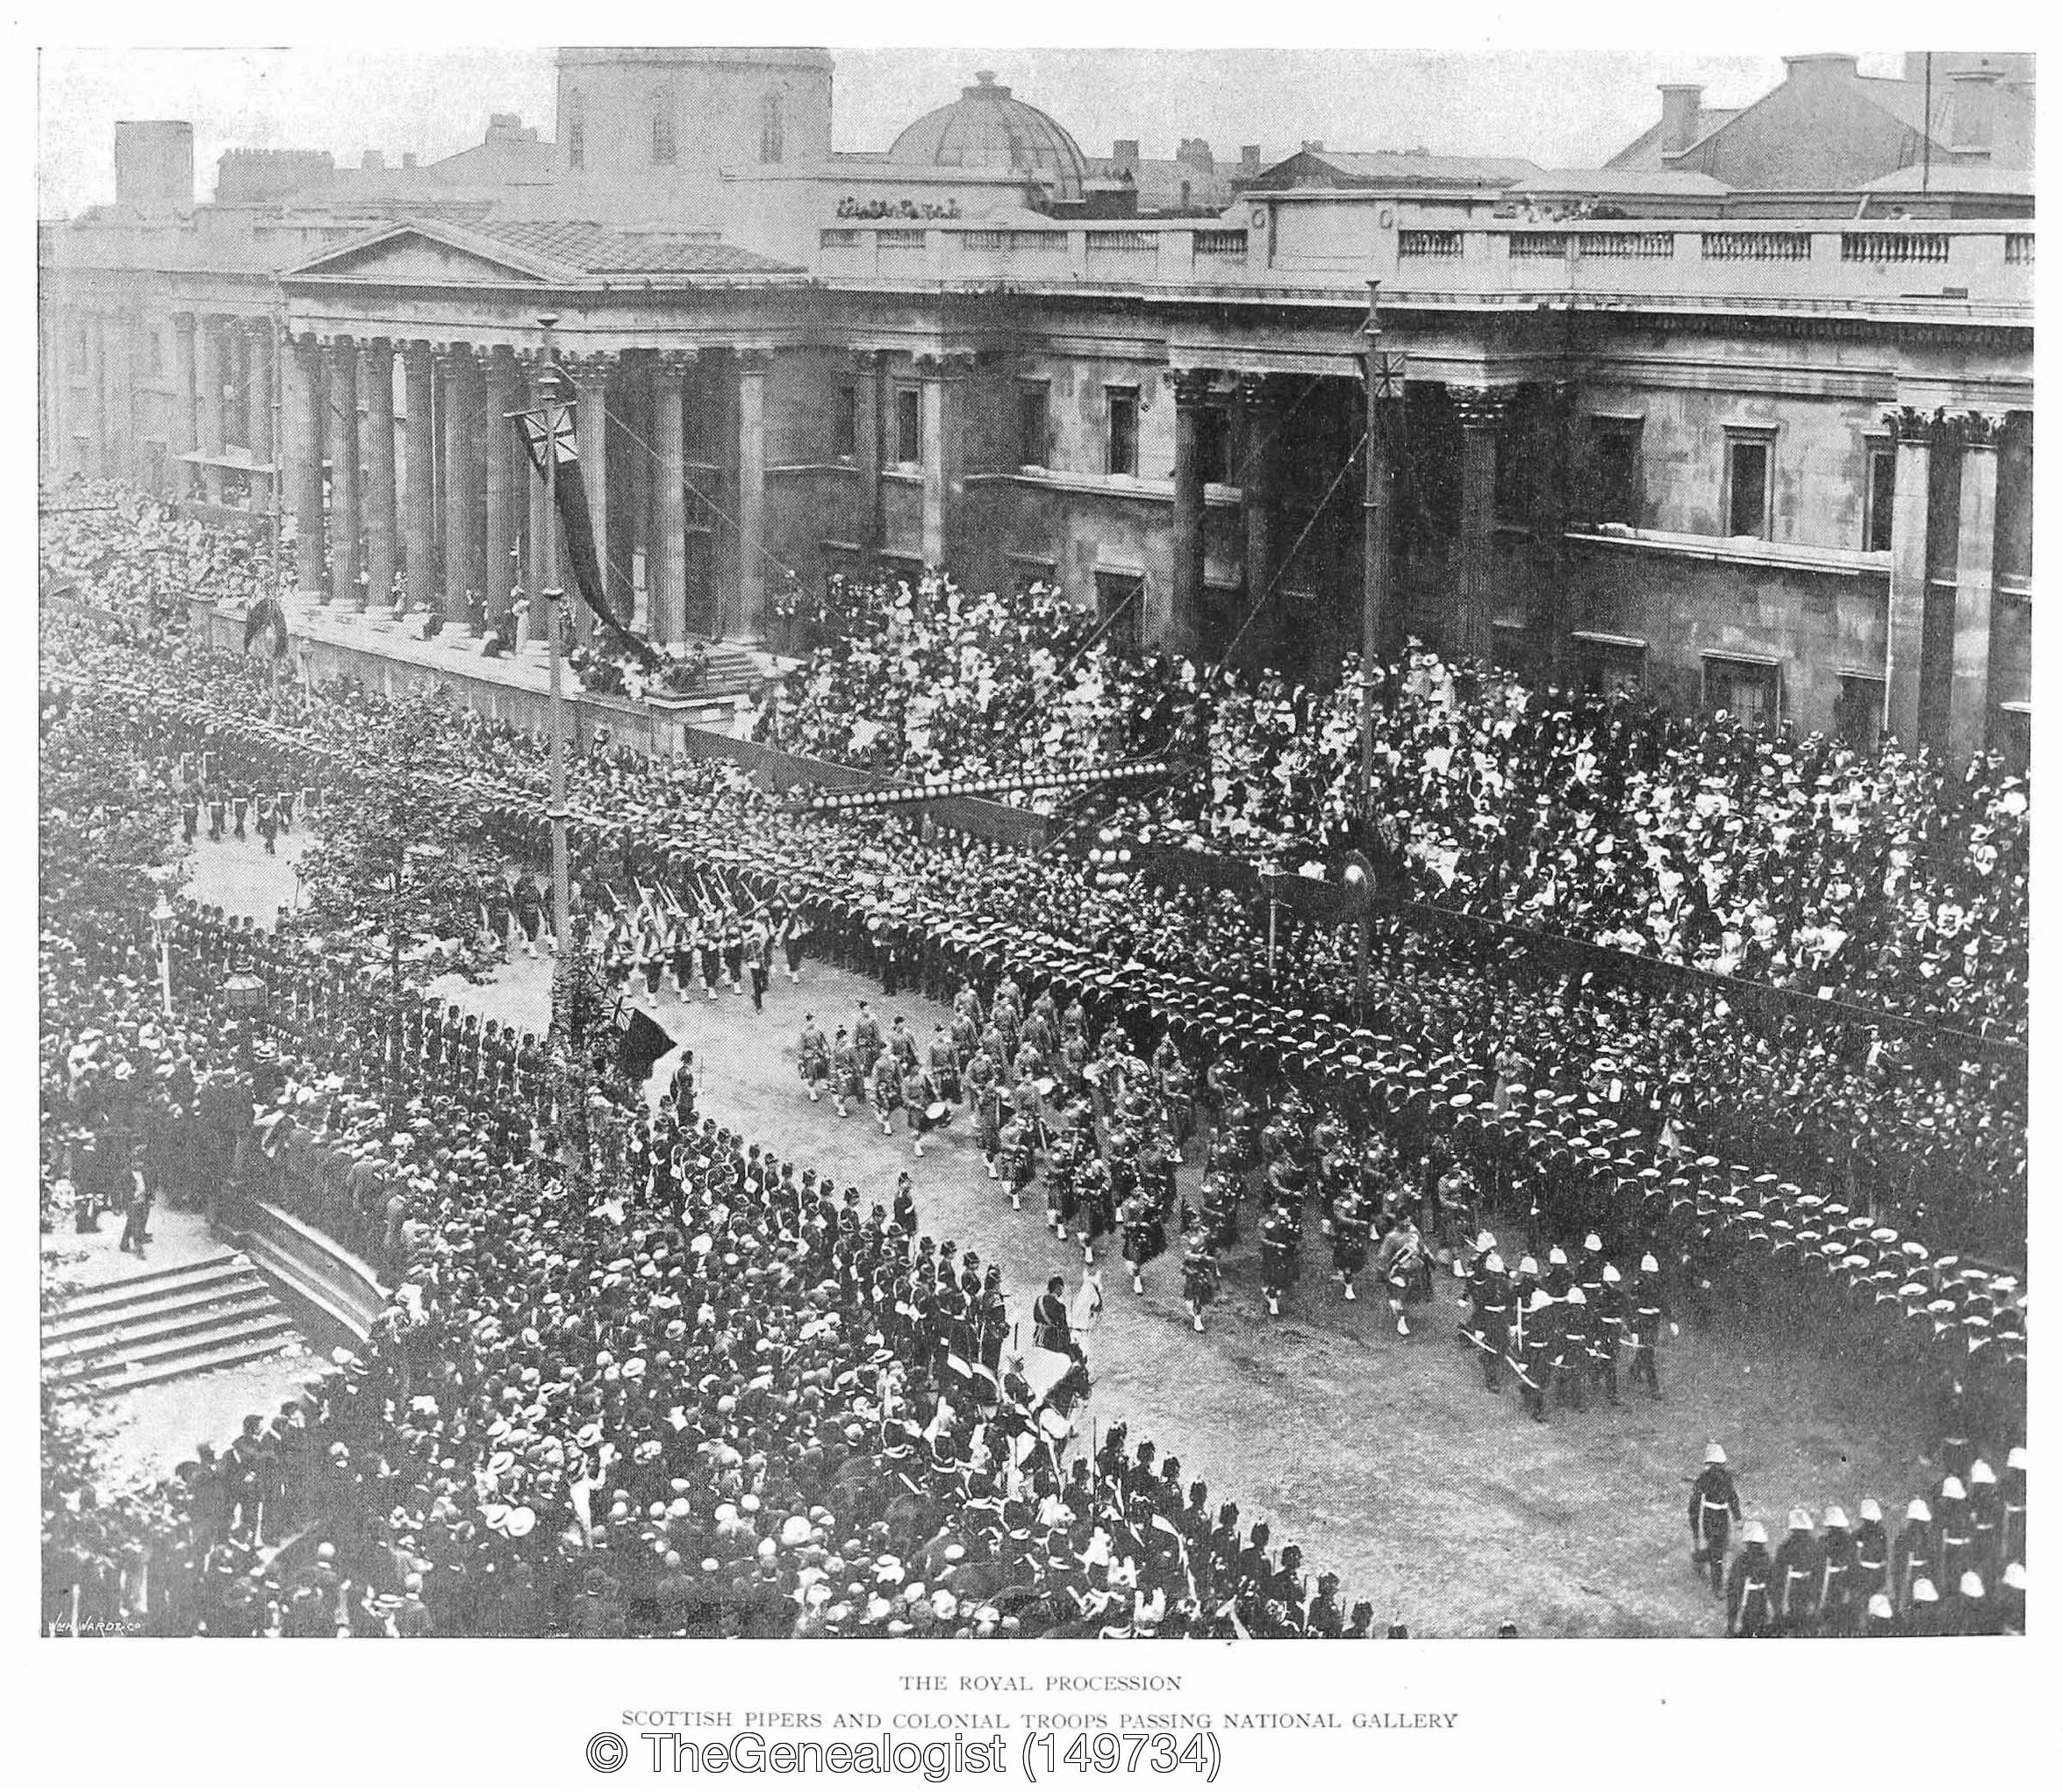 Troops passing National Gallery 1897 – Peerage, Gentry & Royalty Records on TheGenealogist